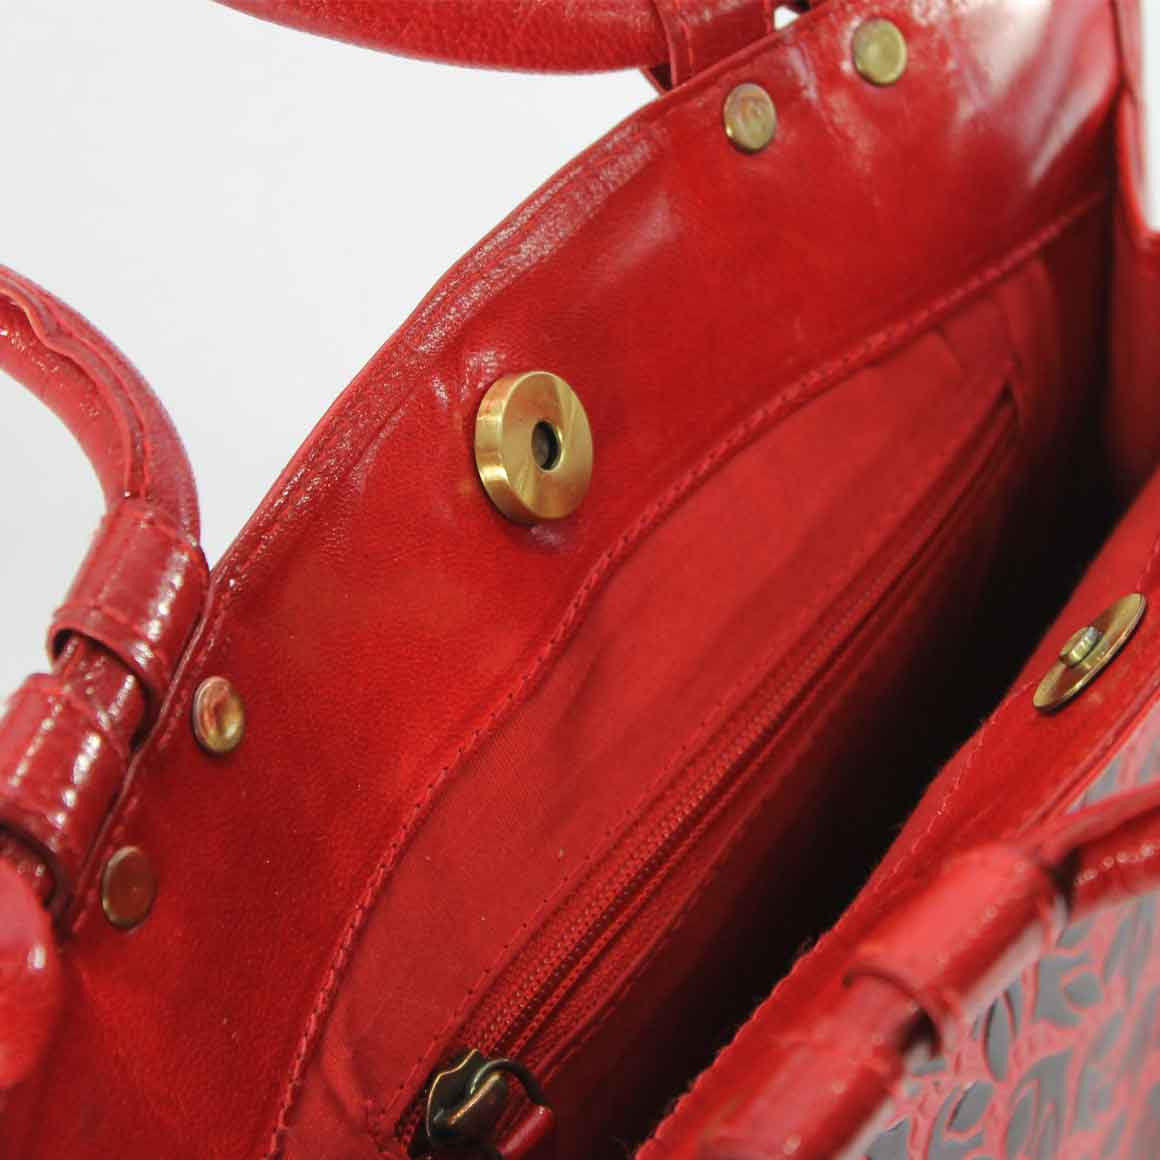 Fair Trade Ethical Red Leather Bag